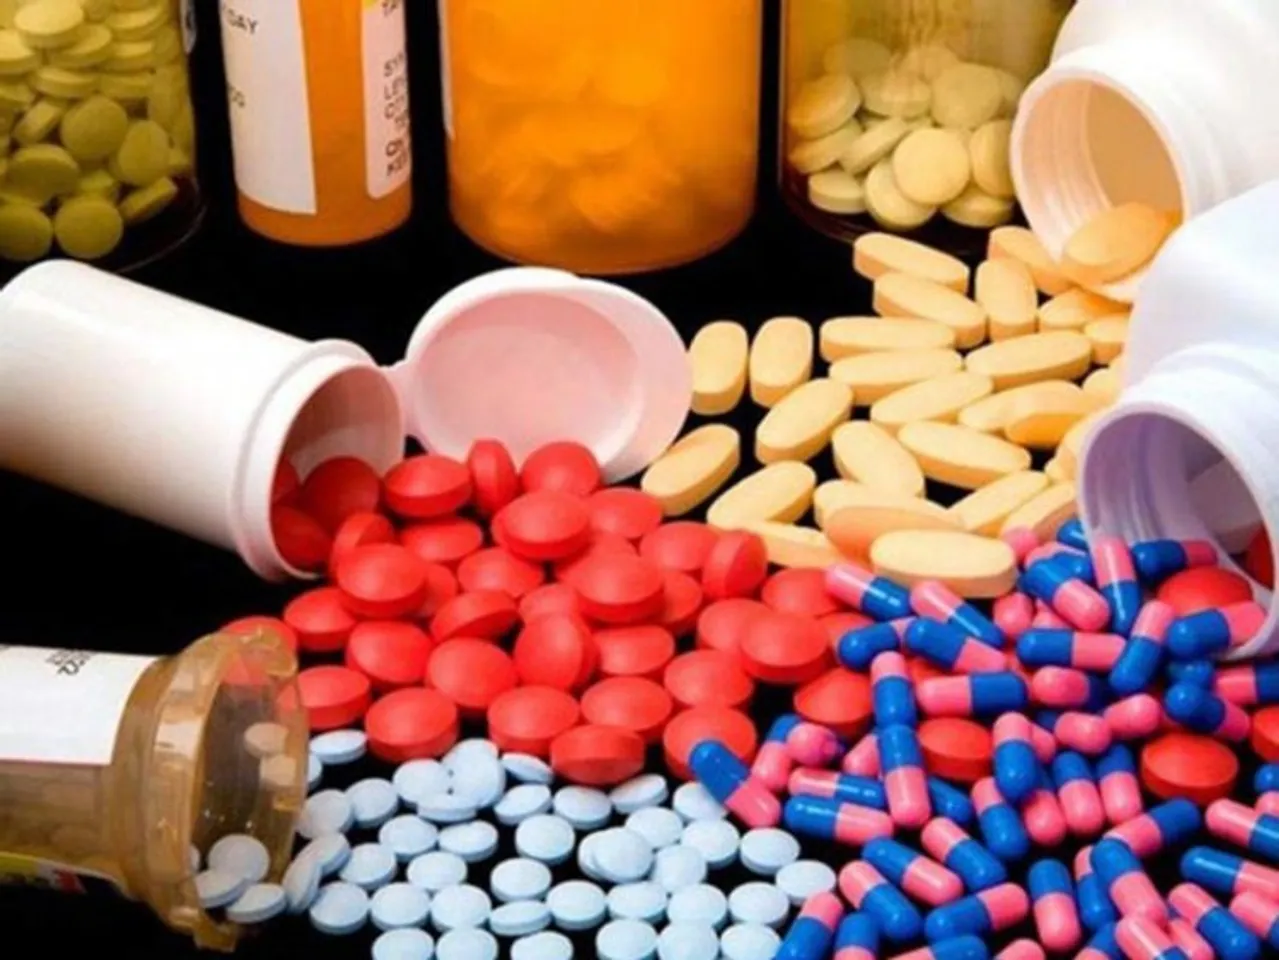 Pharma industry expects to report 7-9 pc revenue growth in FY23